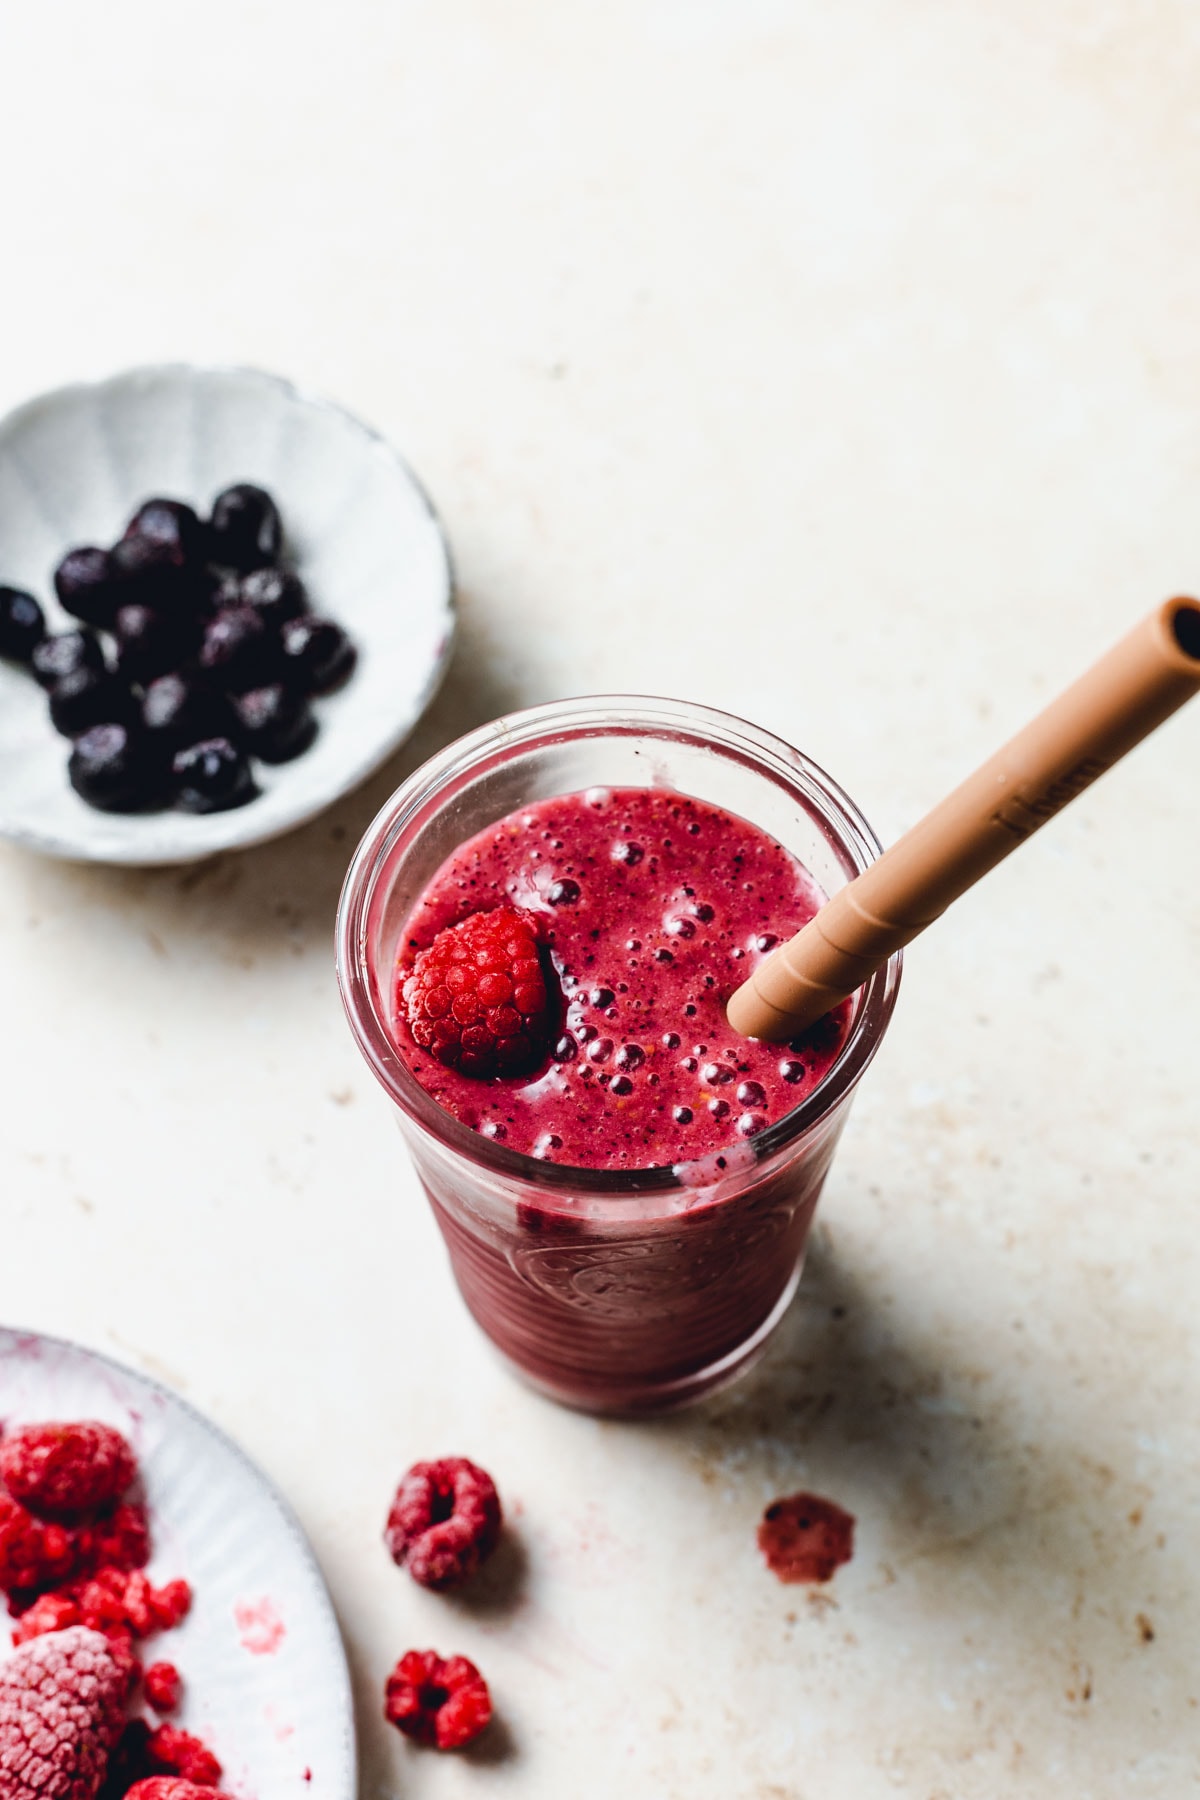 A side view of a deep red berry smoothie with blueberries and raspberries scattered around it.